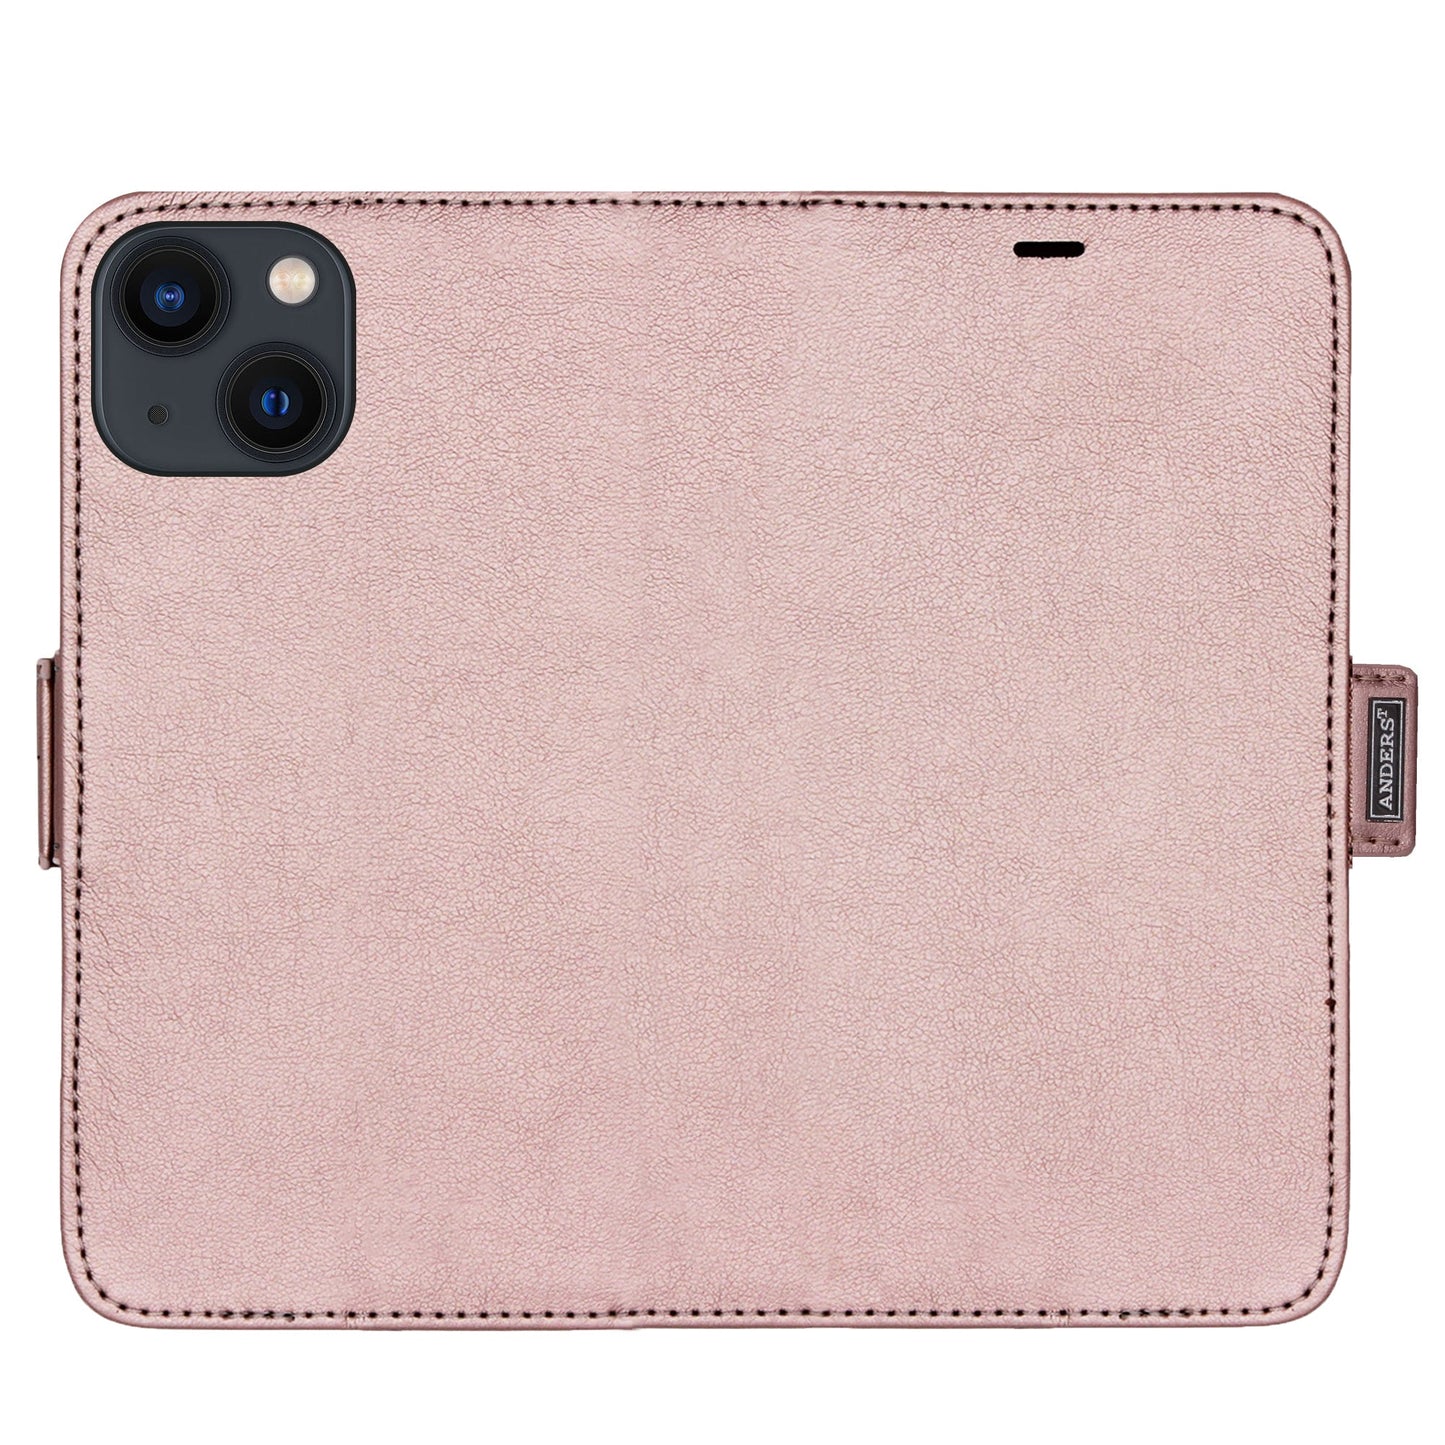 Solid rose gold Victor case for iPhone 13 Mini